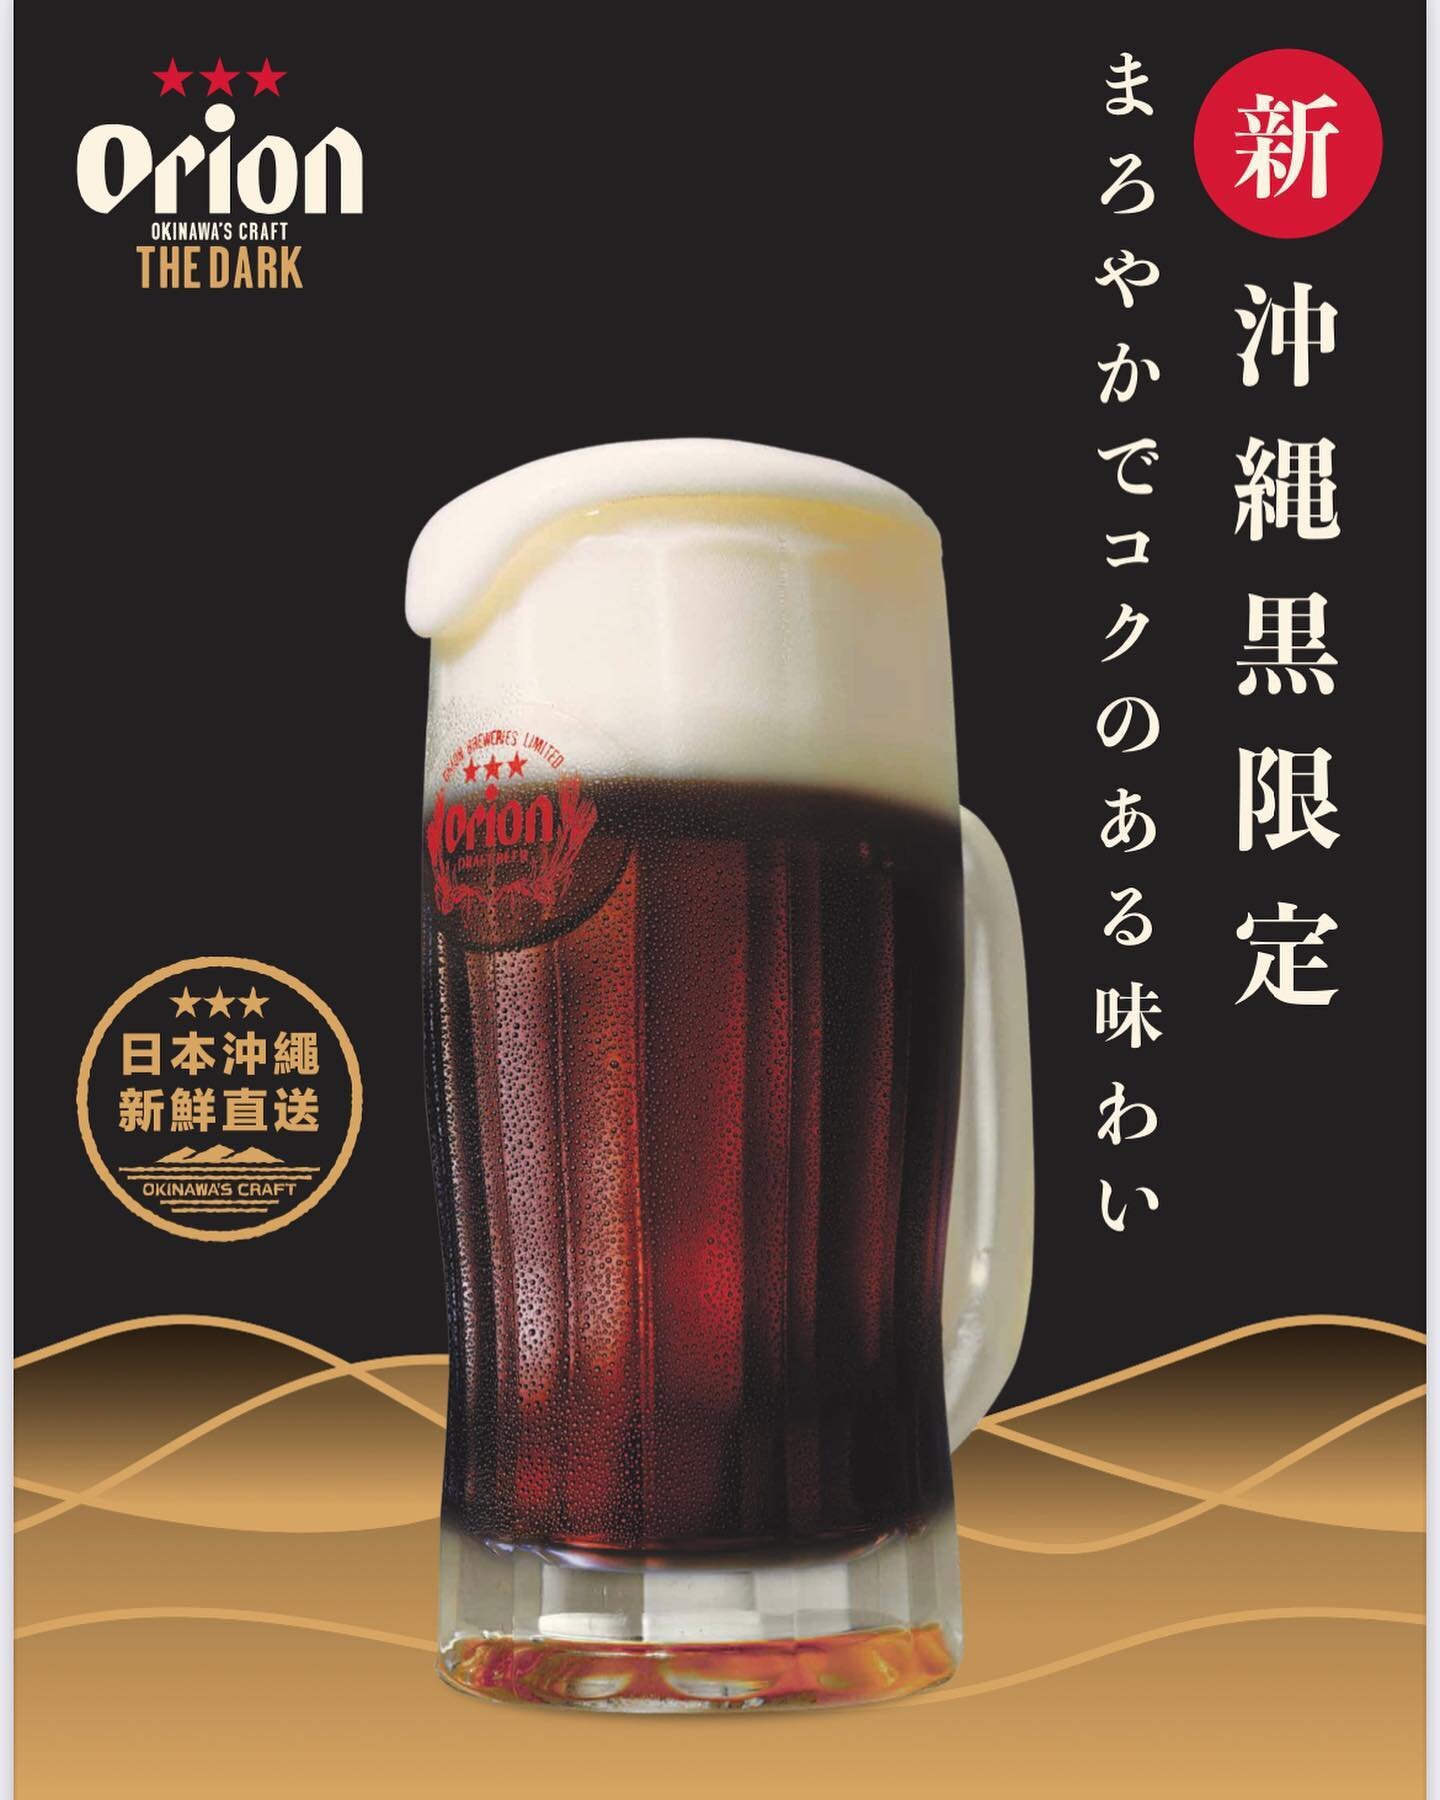 The dark, brewed and kegged in Okinawa Japan.
Genuine Product proudly Japan Made.
#aebeerimports #aandebeerimports #tapbeer #draftbeer #draftbeerspecialist #tapbeerspecials #draftbeersystem #darkbeer #japanesebeer #orionbeer #exclusive #生ビール #オリオンビール